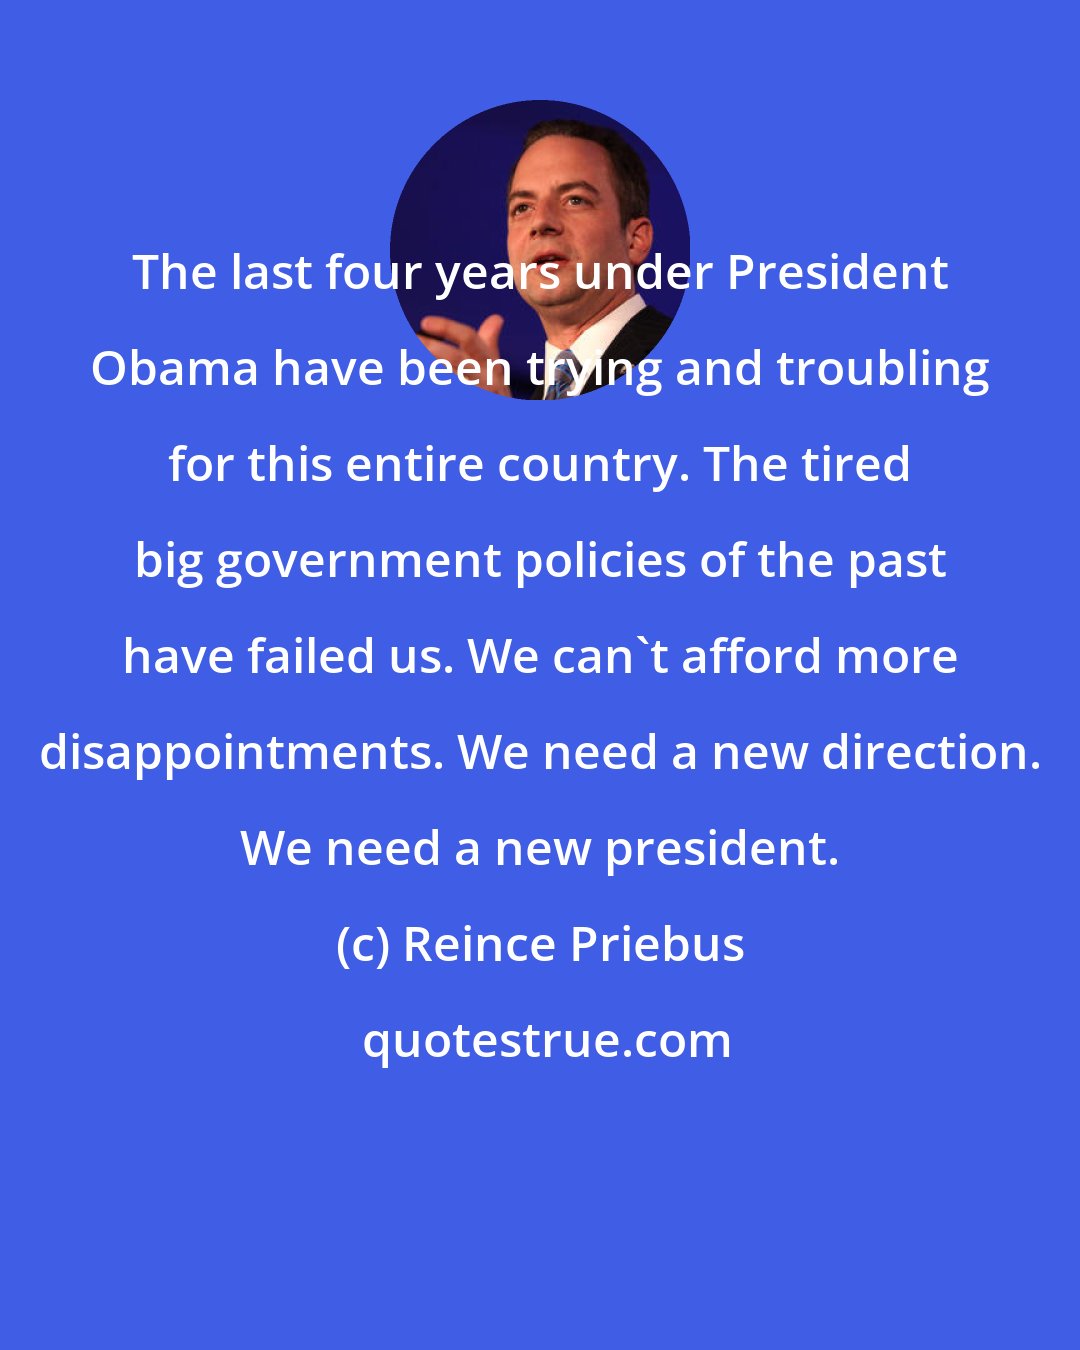 Reince Priebus: The last four years under President Obama have been trying and troubling for this entire country. The tired big government policies of the past have failed us. We can't afford more disappointments. We need a new direction. We need a new president.